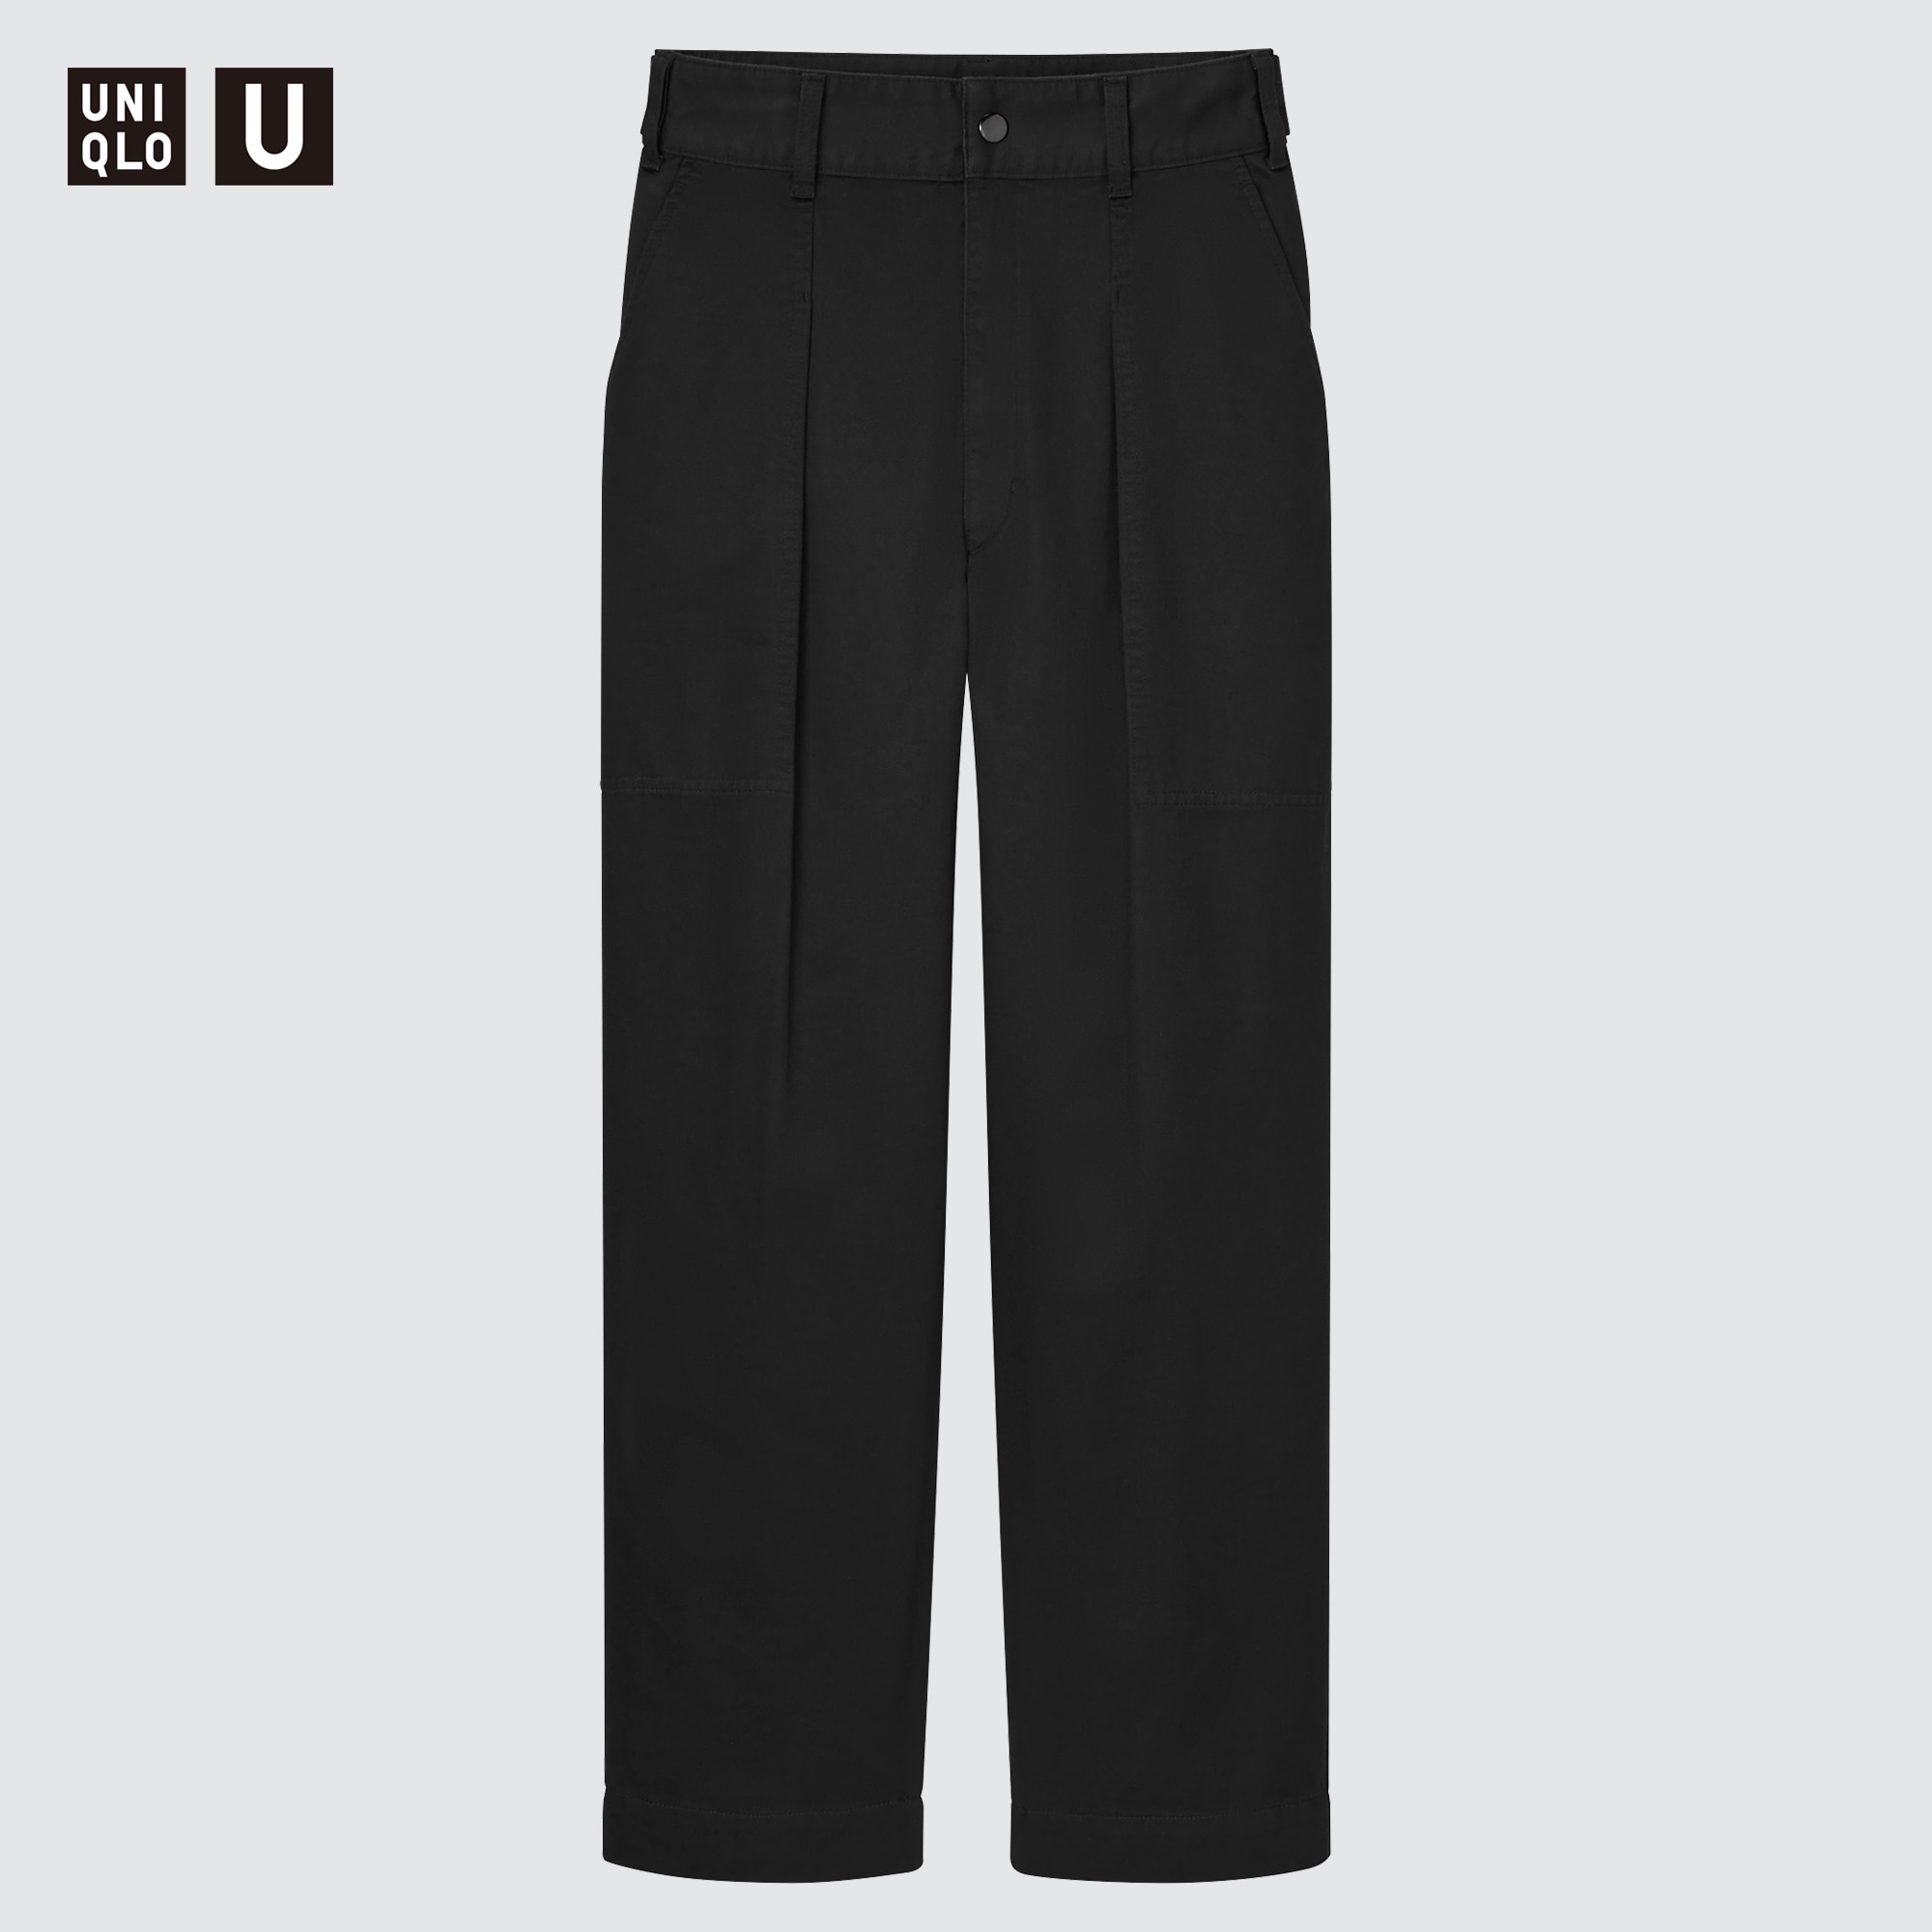 Fashion Trousers Pleated Trousers Asos Pleated Trousers black business style 